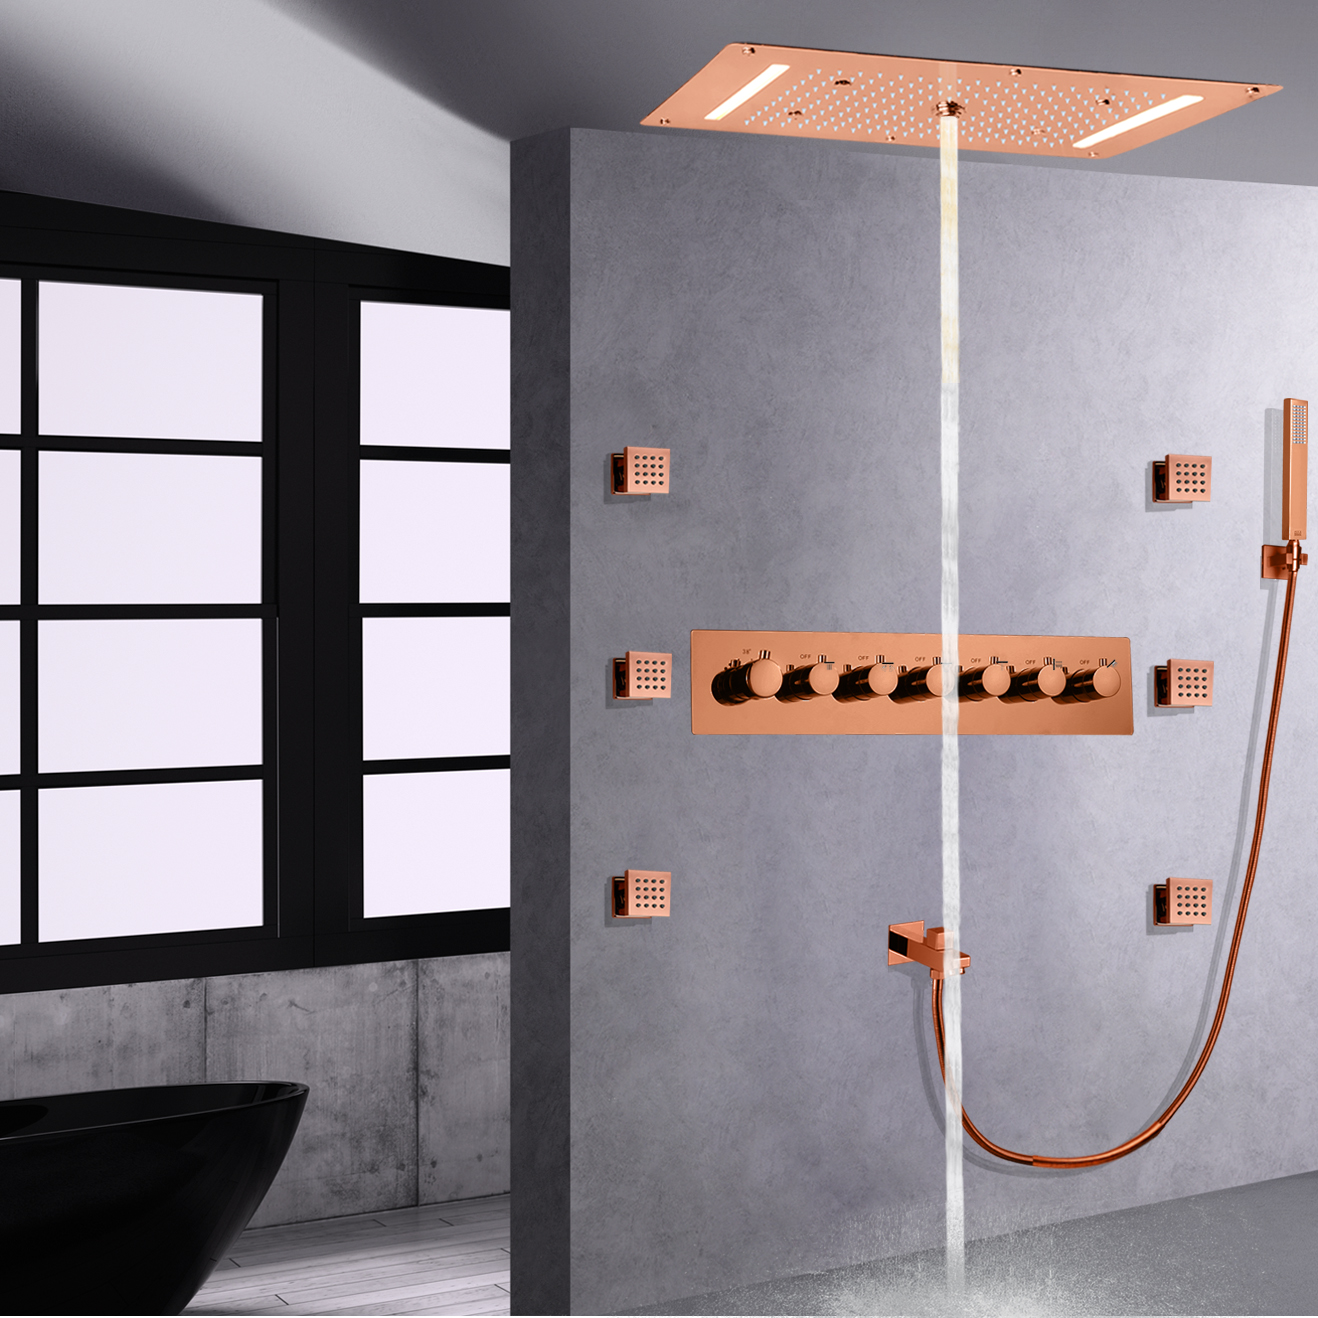 Rose Gold LED Shower System With Handheld Sprays Thermostatic Shower Faucet Panel Rainfall Shower Head Handheld Spa